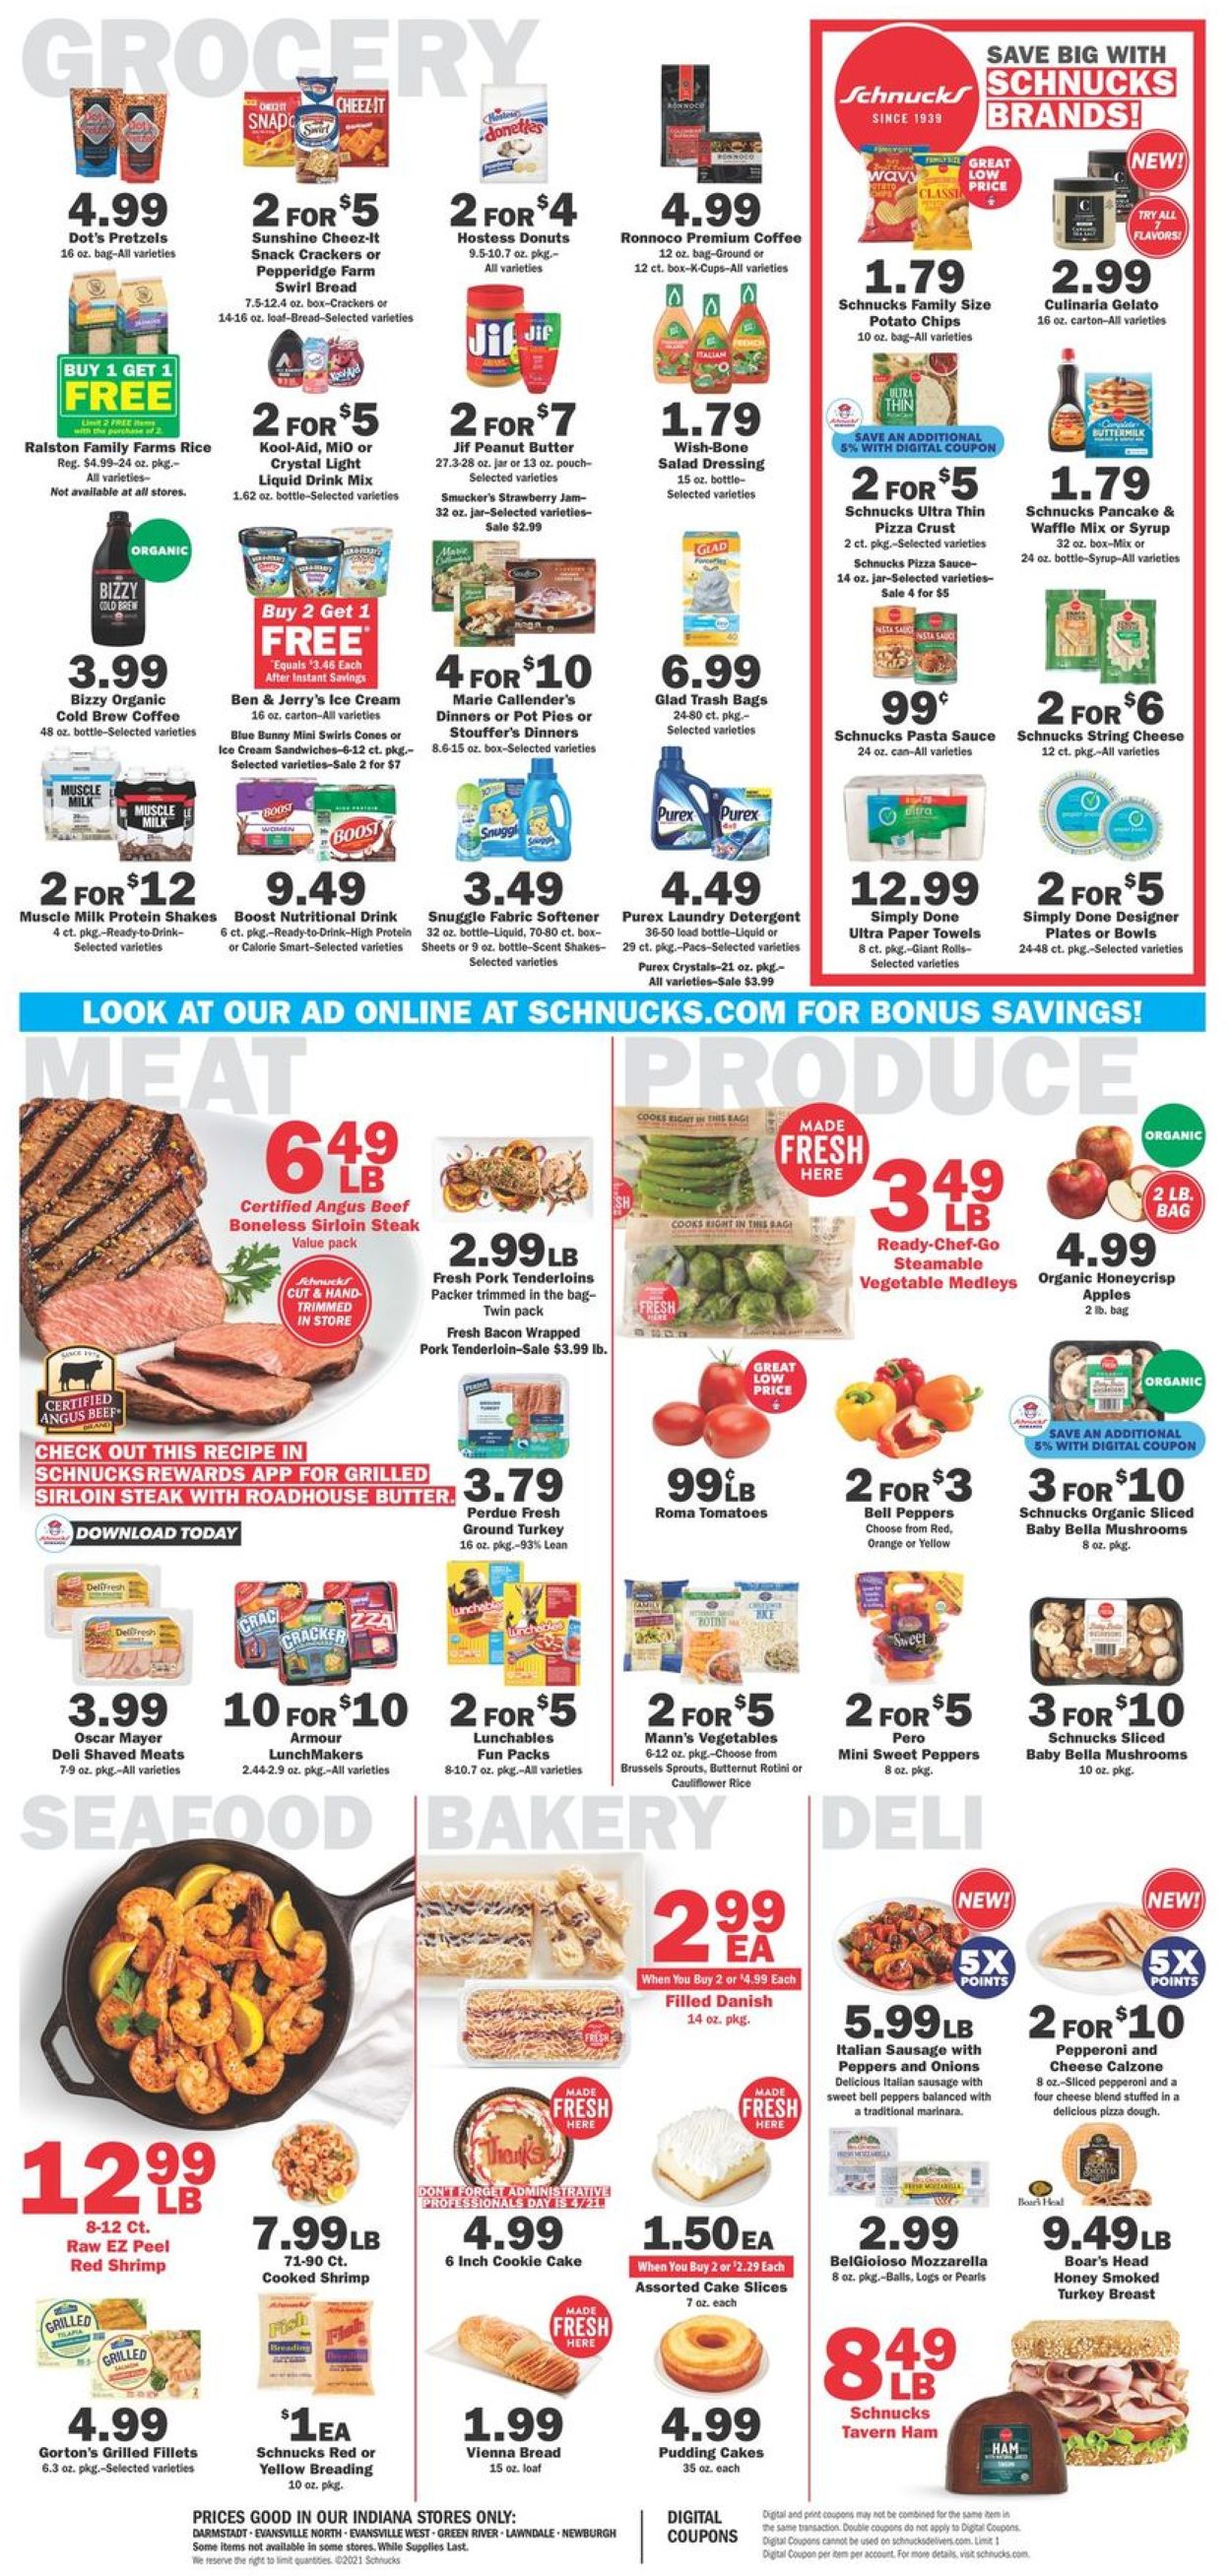 Schnucks Current weekly ad 04/14 - 04/20/2021 [4] - frequent-ads.com